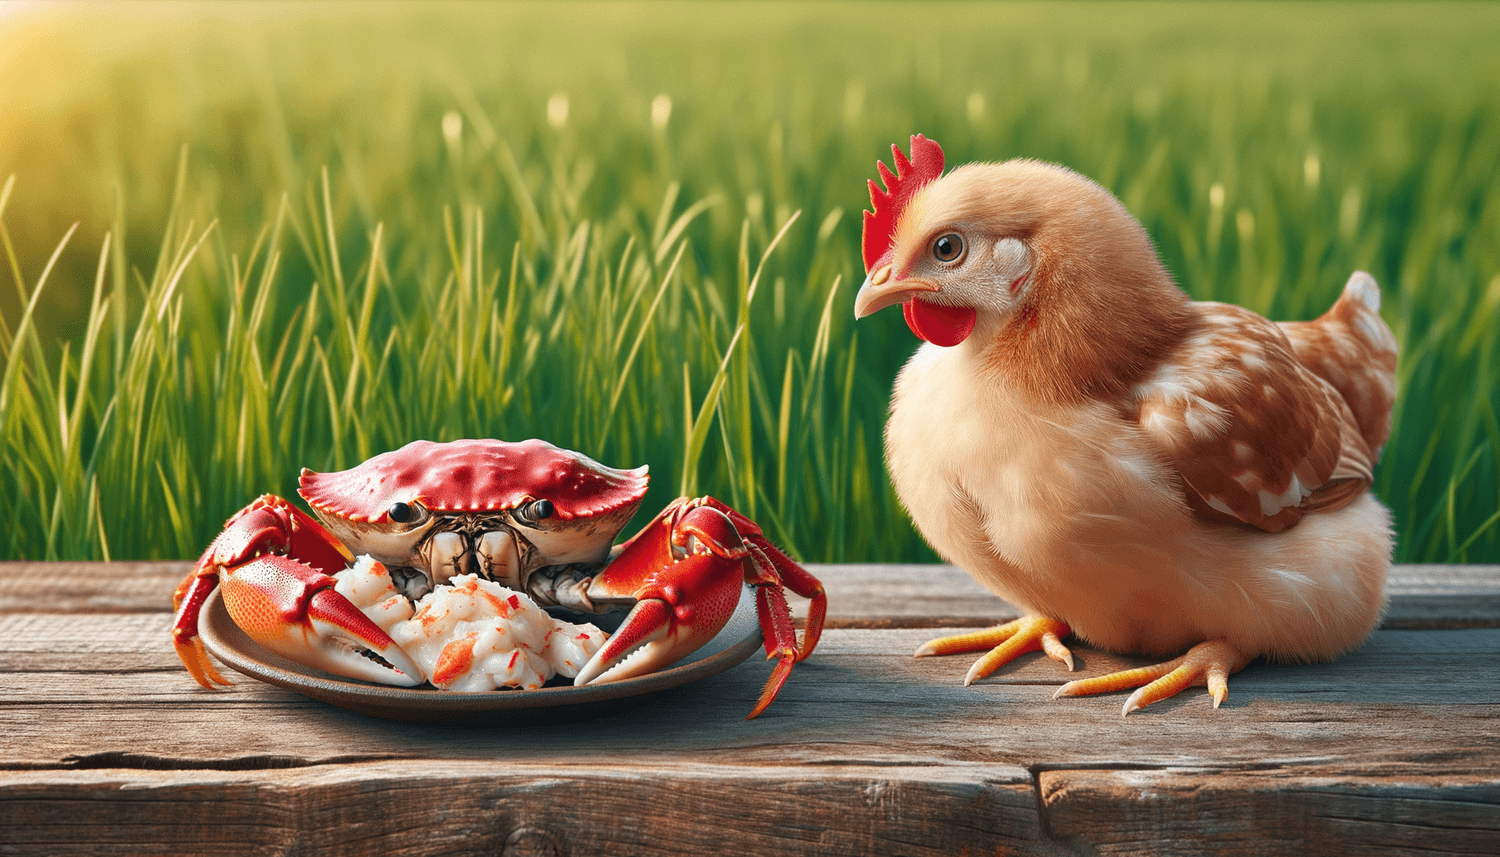 Can Chickens Eat Imitation Crab Meat?